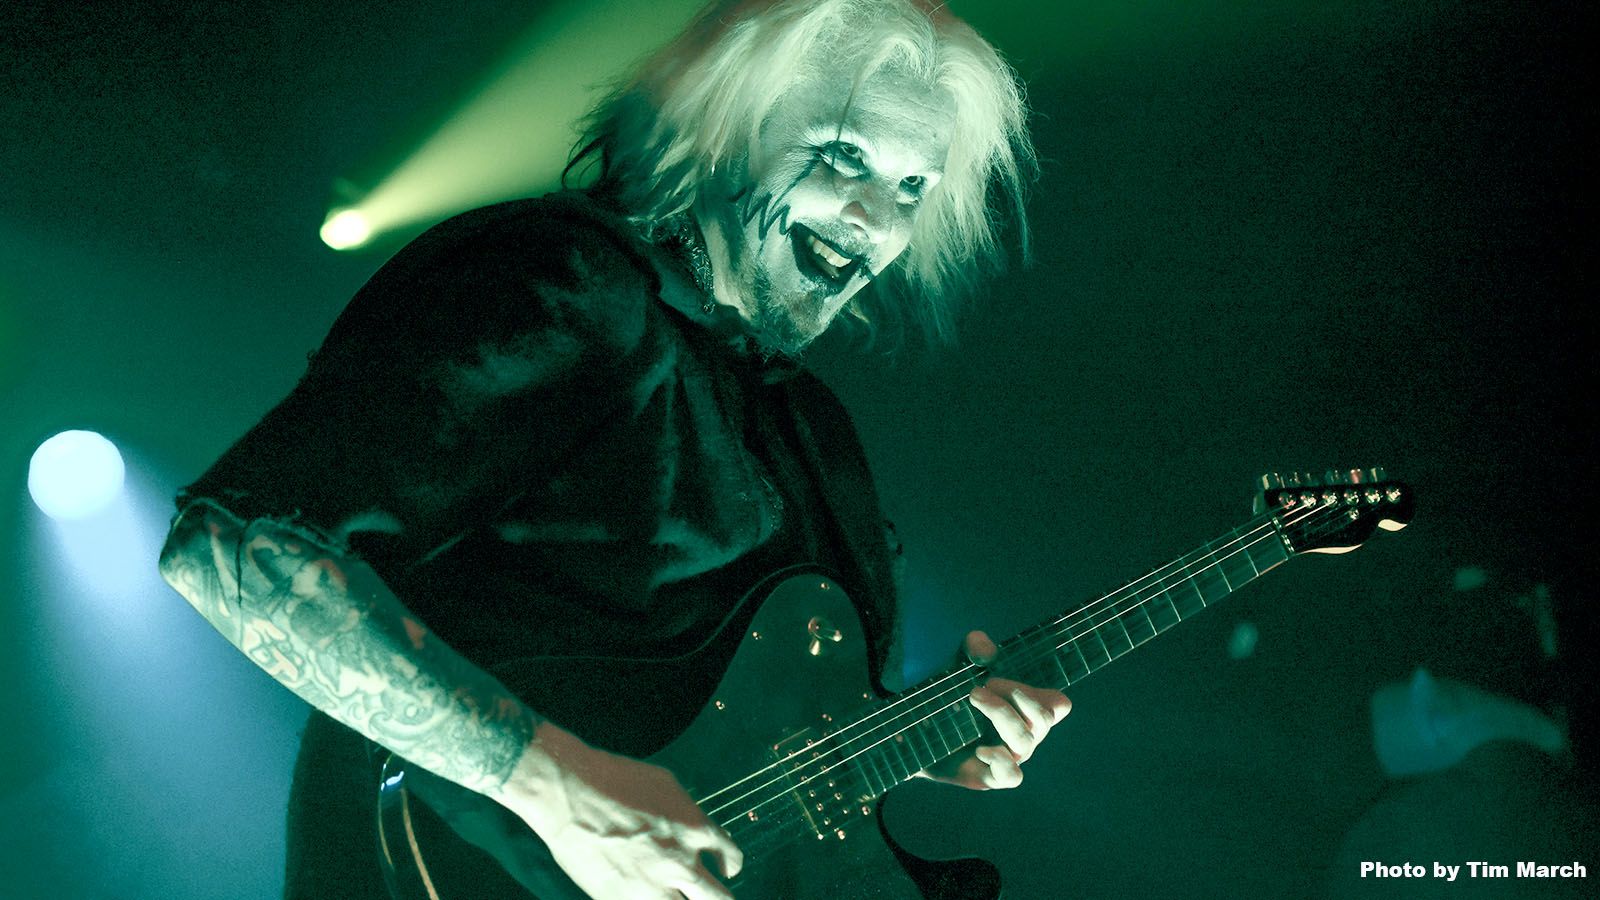 Famed guitarist John 5 will be at The Eclectic Room in Angola on Tuesday, Feb. 6.